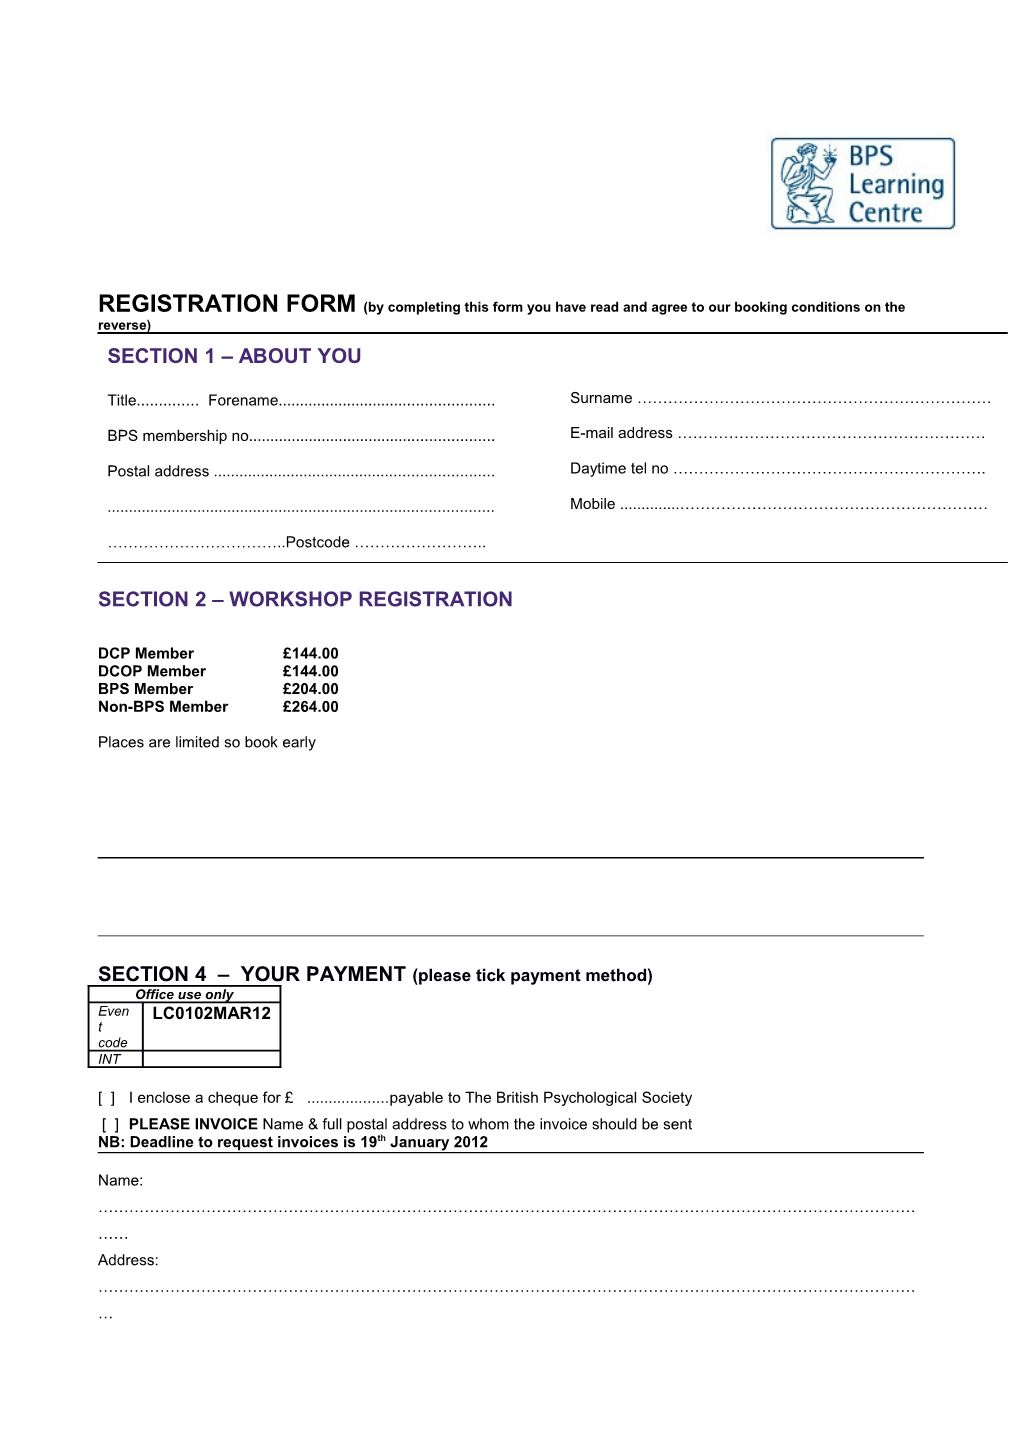 REGISTRATION FORM (By Completing This Form You Have Read and Agree to Our Booking Conditions